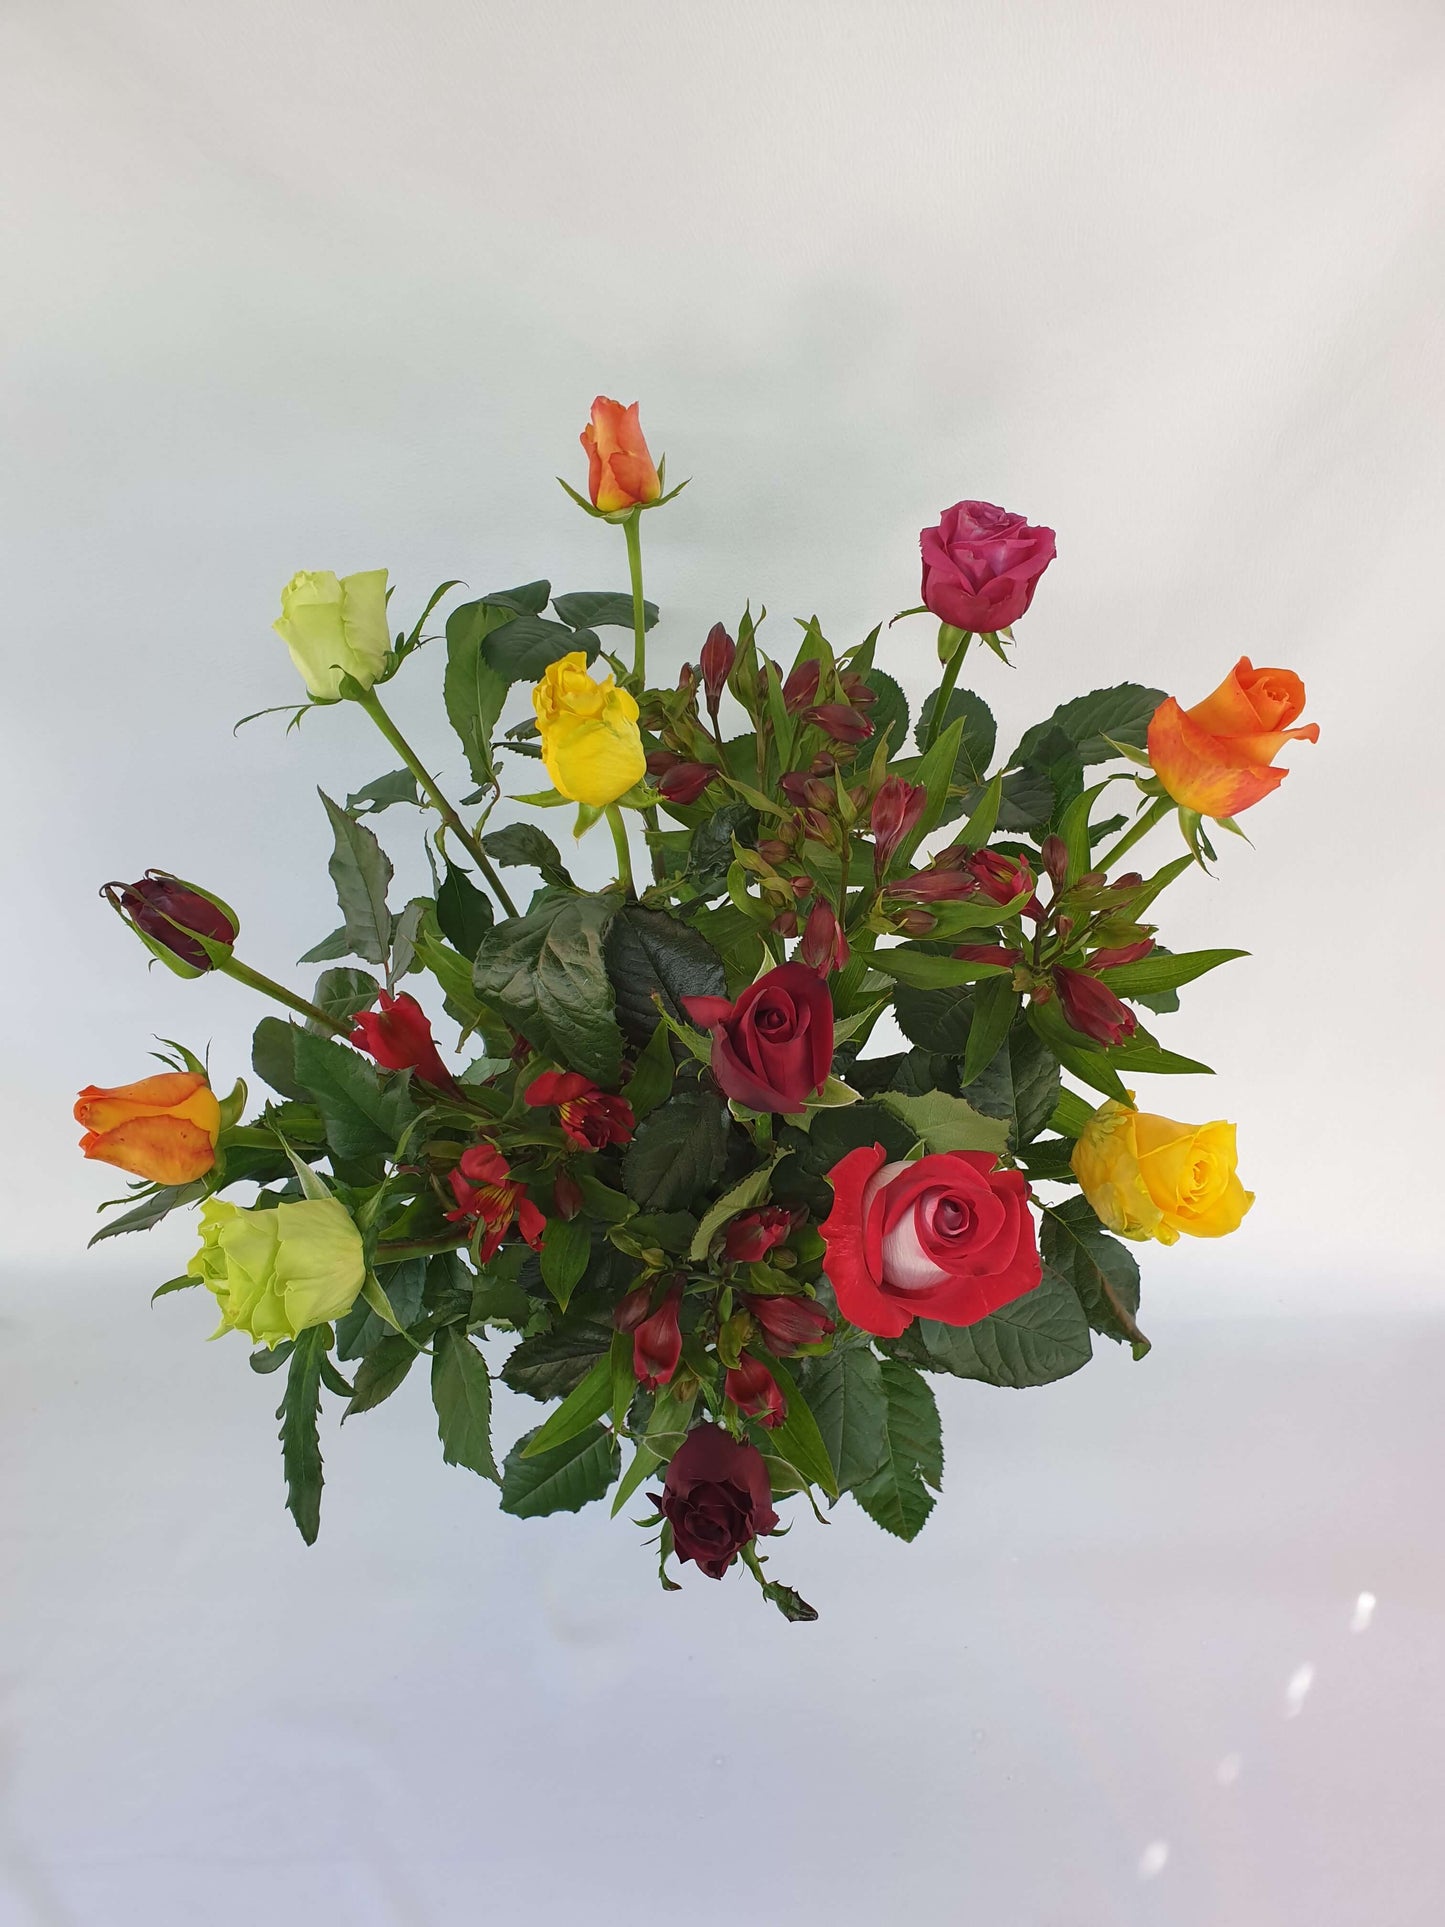 A dozen bright red, orange, yellow, and green roses from above